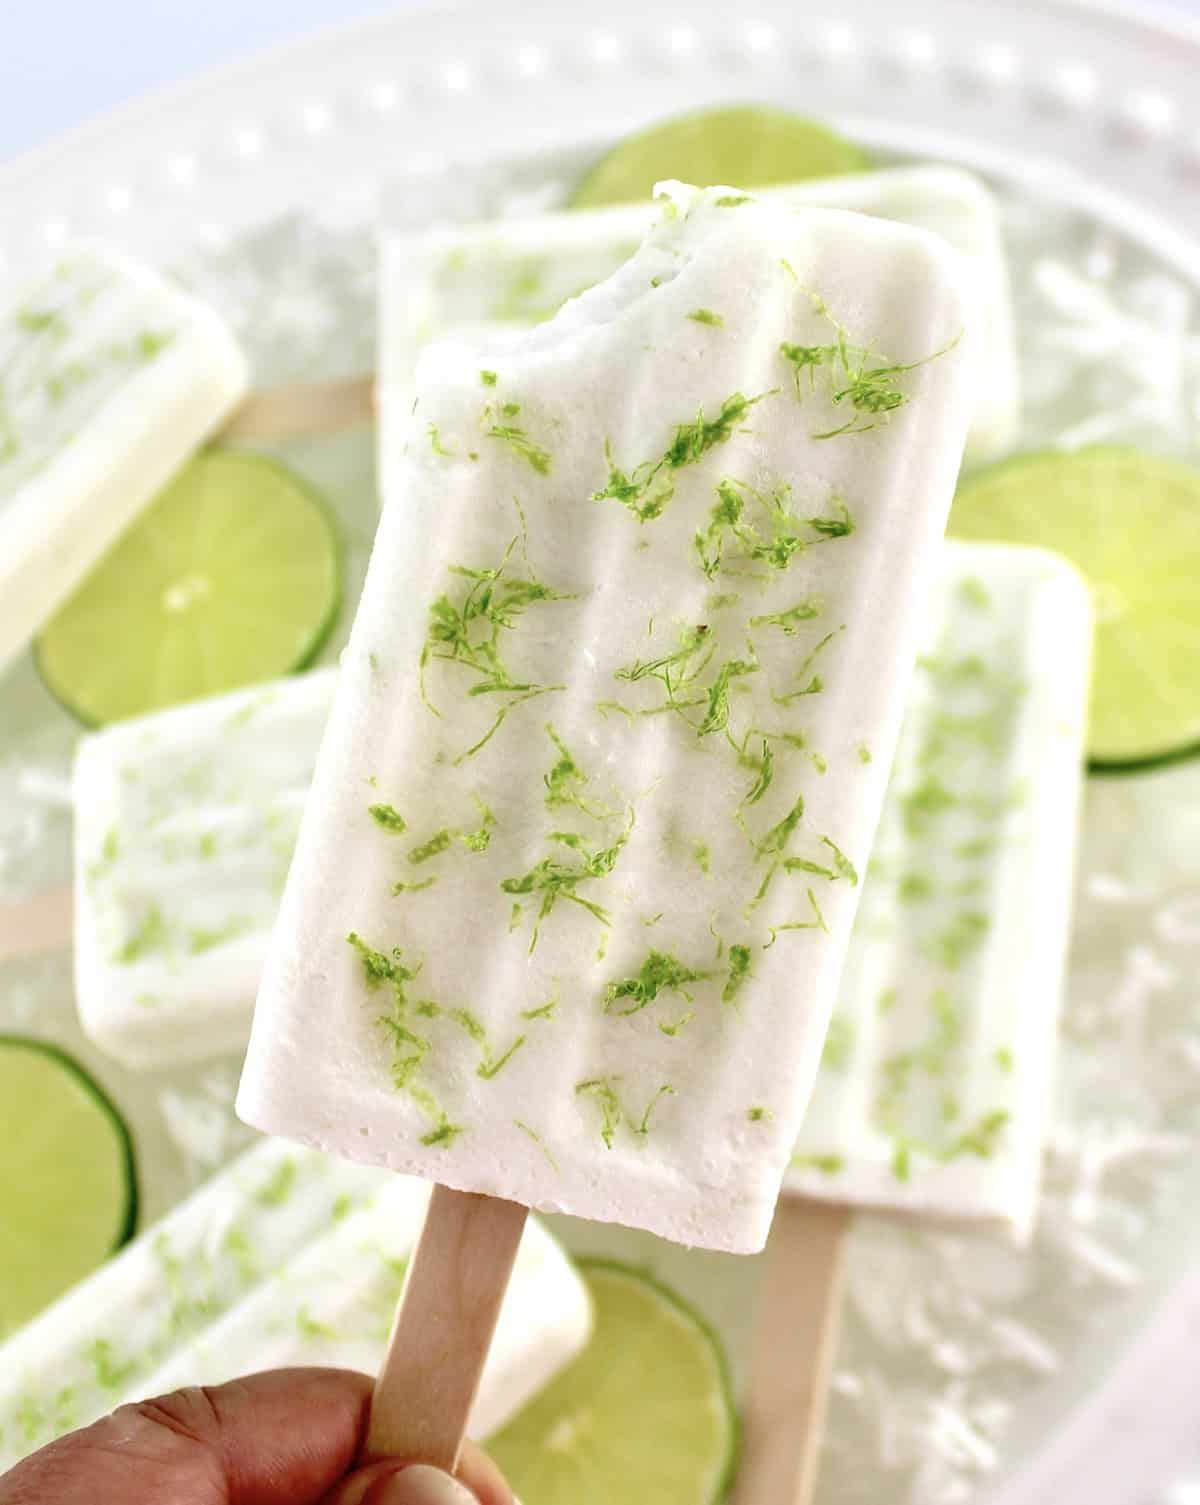 holding up Coconut Lime Popsicle with lime zest and bite missing with more popsicles in background